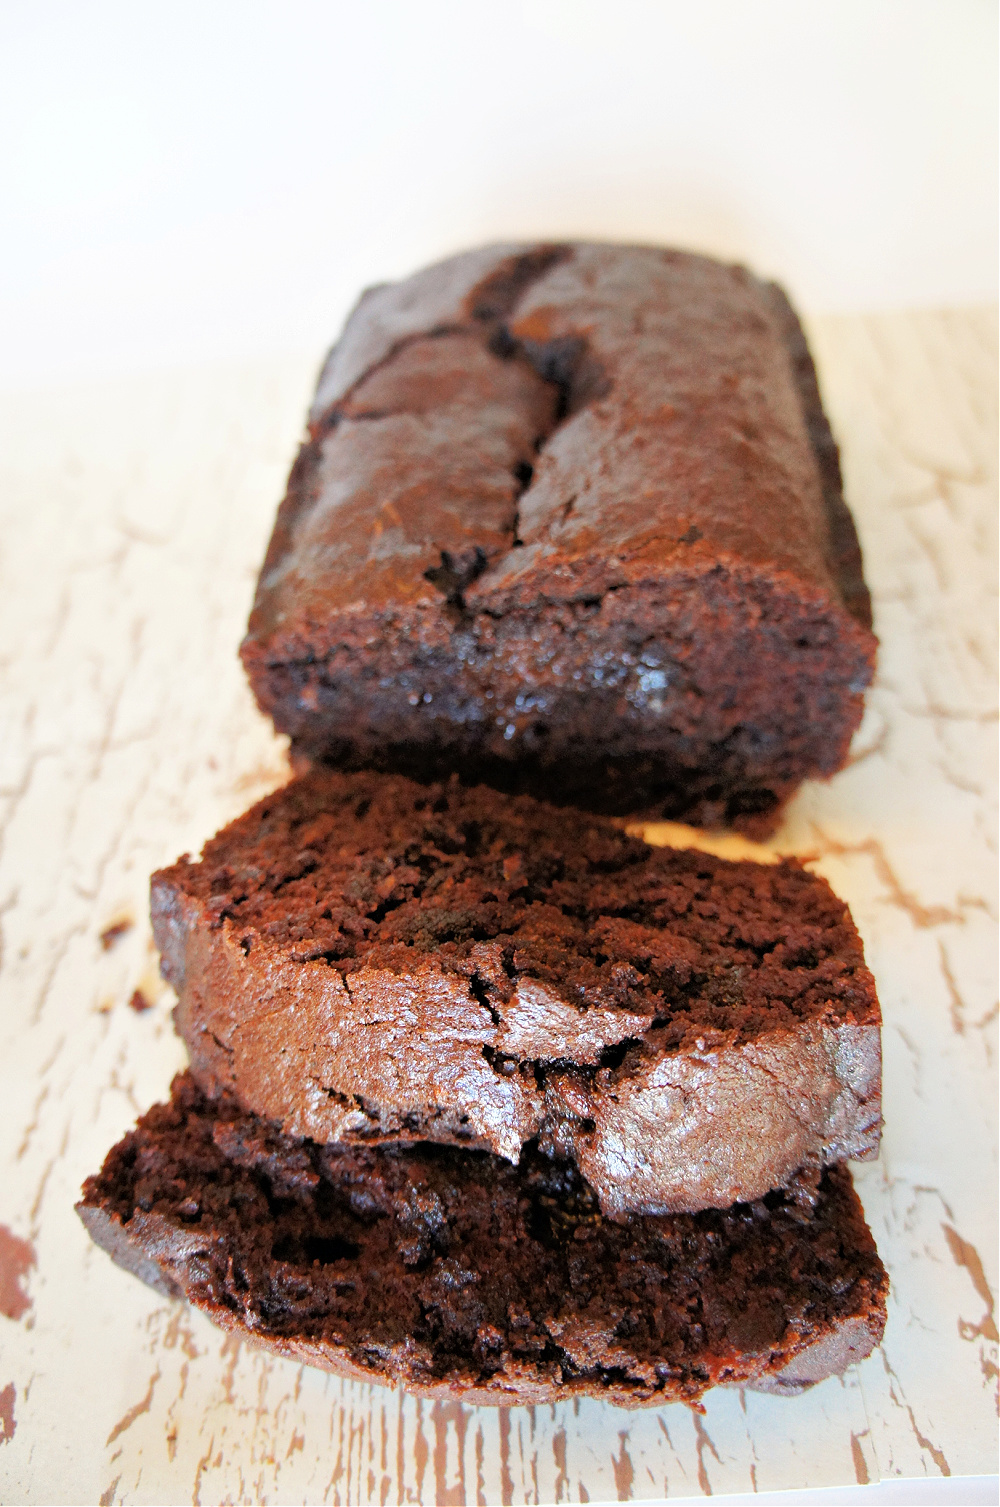 Zucchini Bread with Chocolate Chips